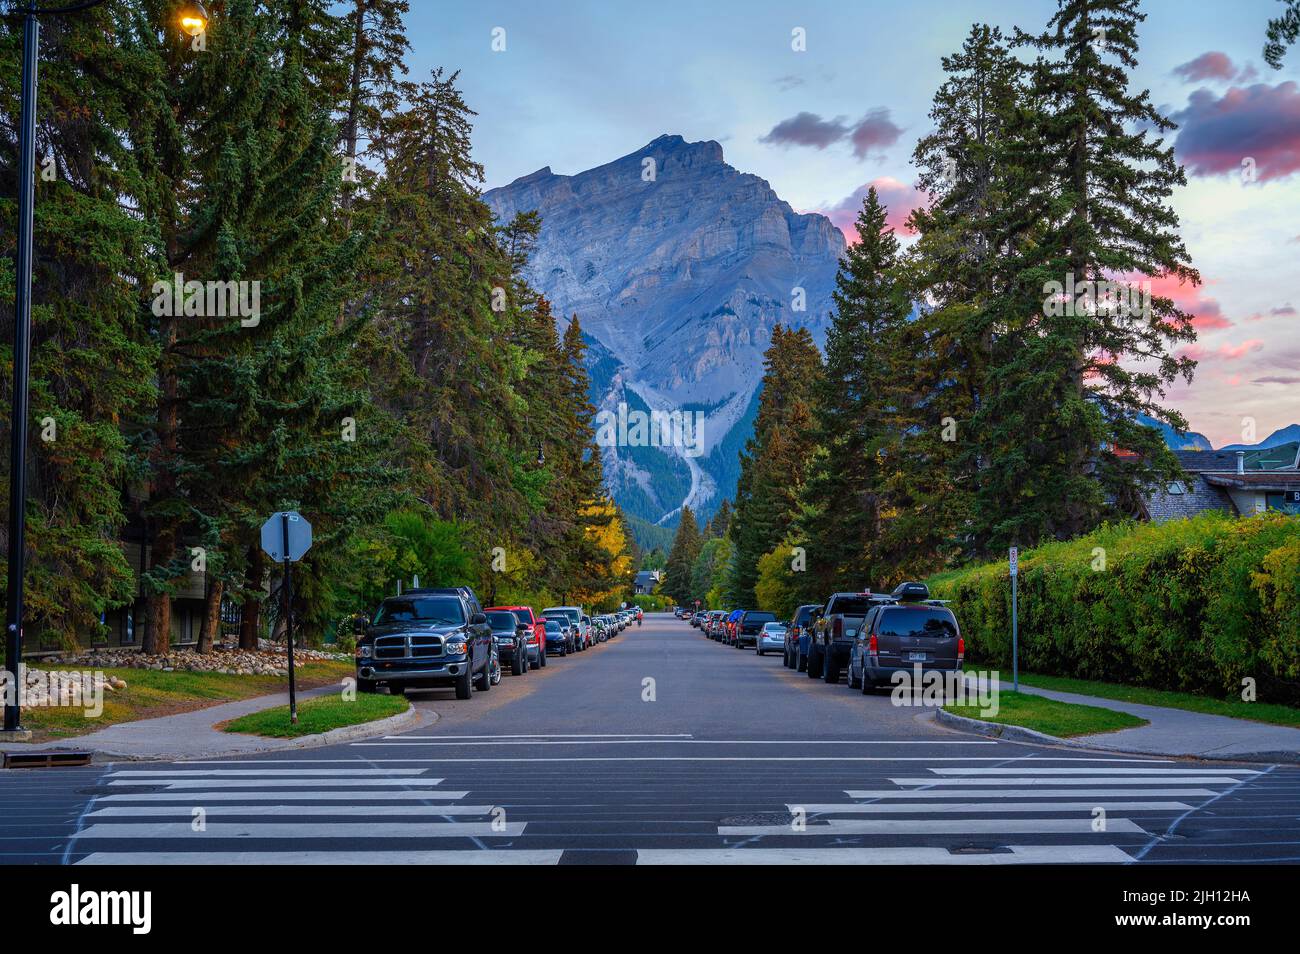 Scenic street view of Banff, Canada, with cars and Cascade Mountain at sunrise Stock Photo